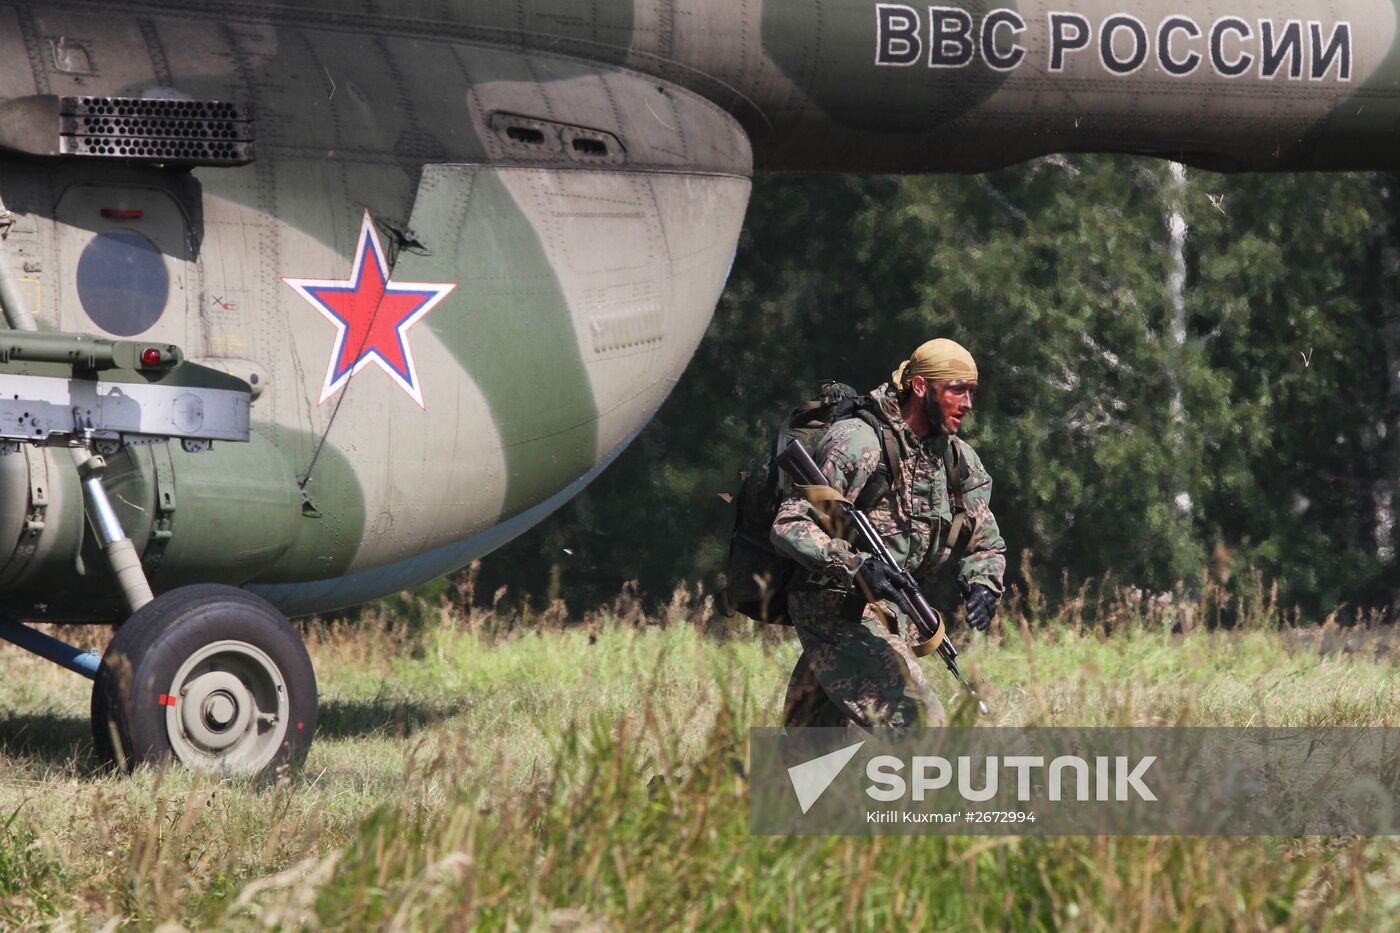 Novosibirsk hosts all-army competition "Best Ground Scouts"